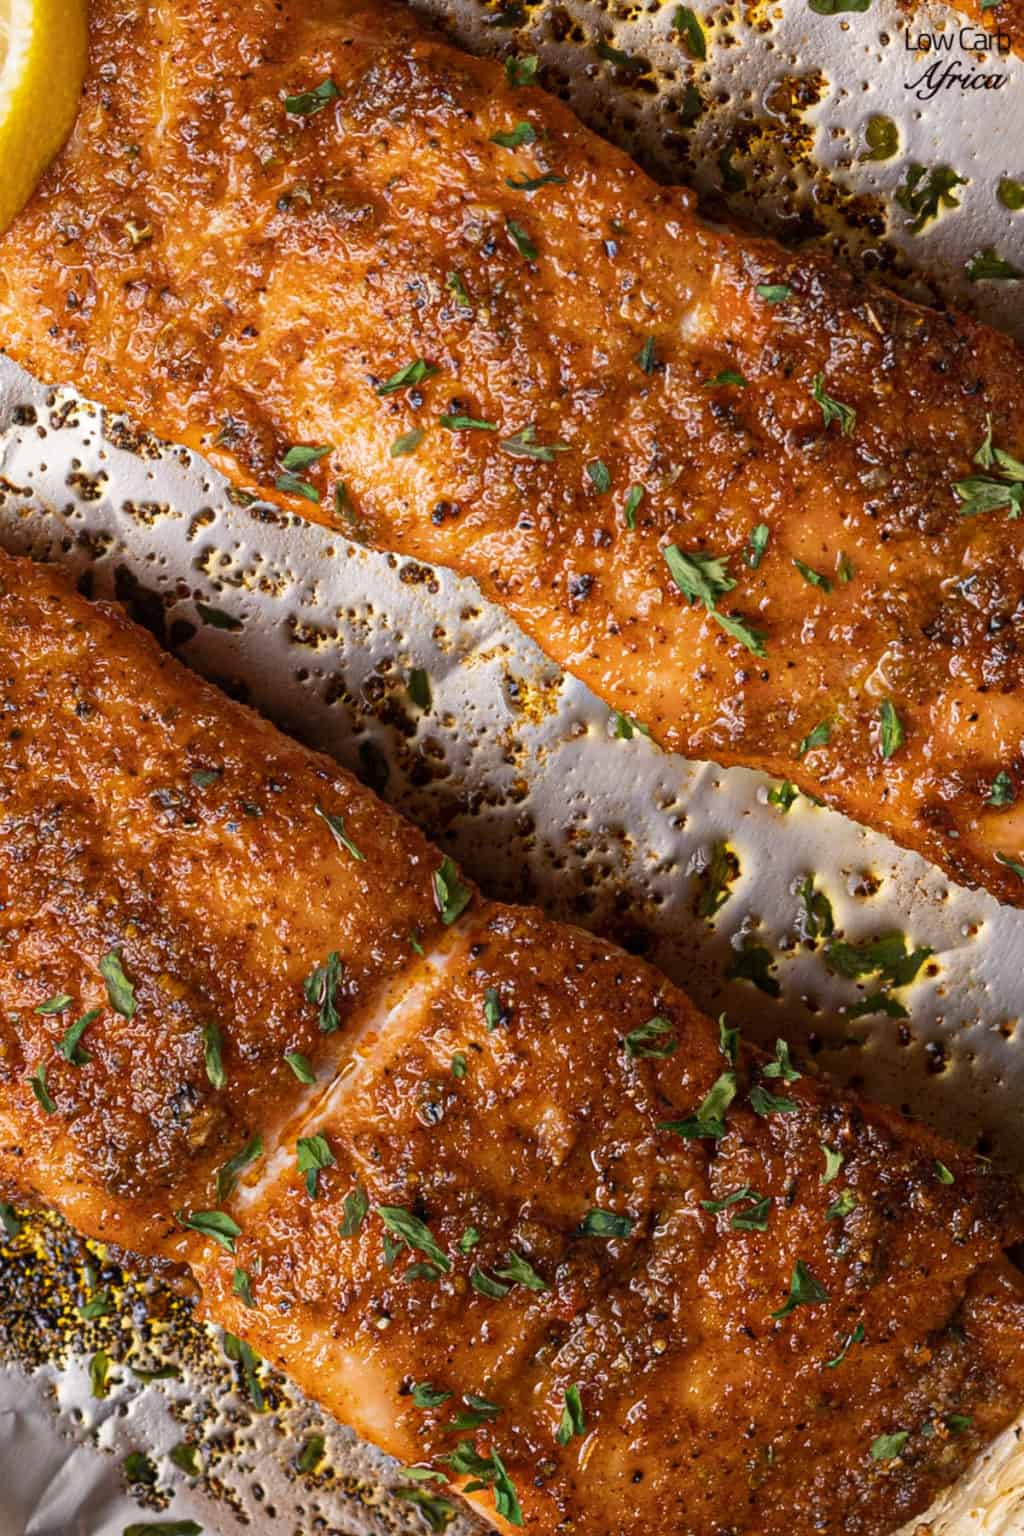 Oven Baked Salmon - Low Carb Africa